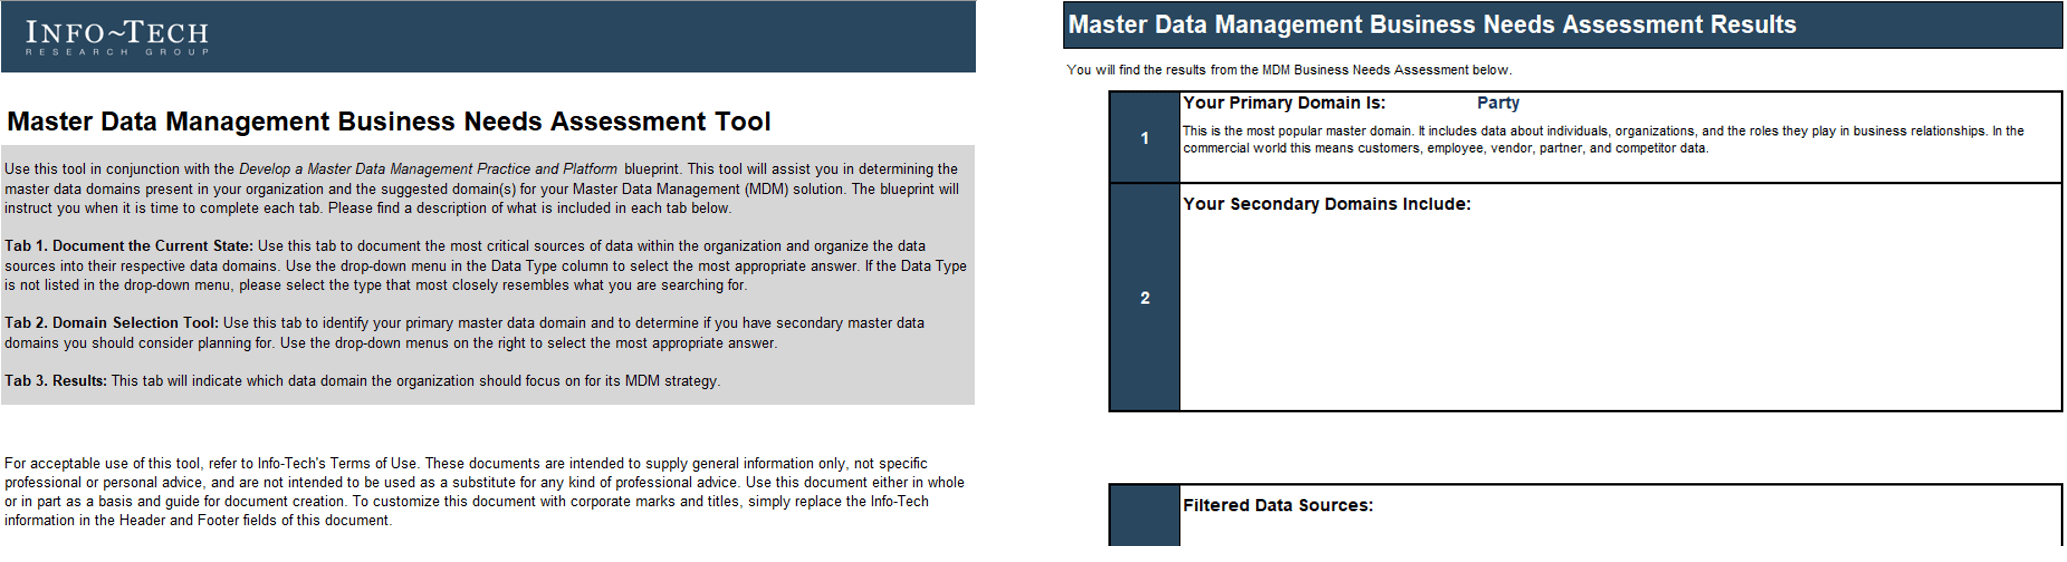 The image contains screenshots of the Master Data Management Business Needs Assessment Tool.